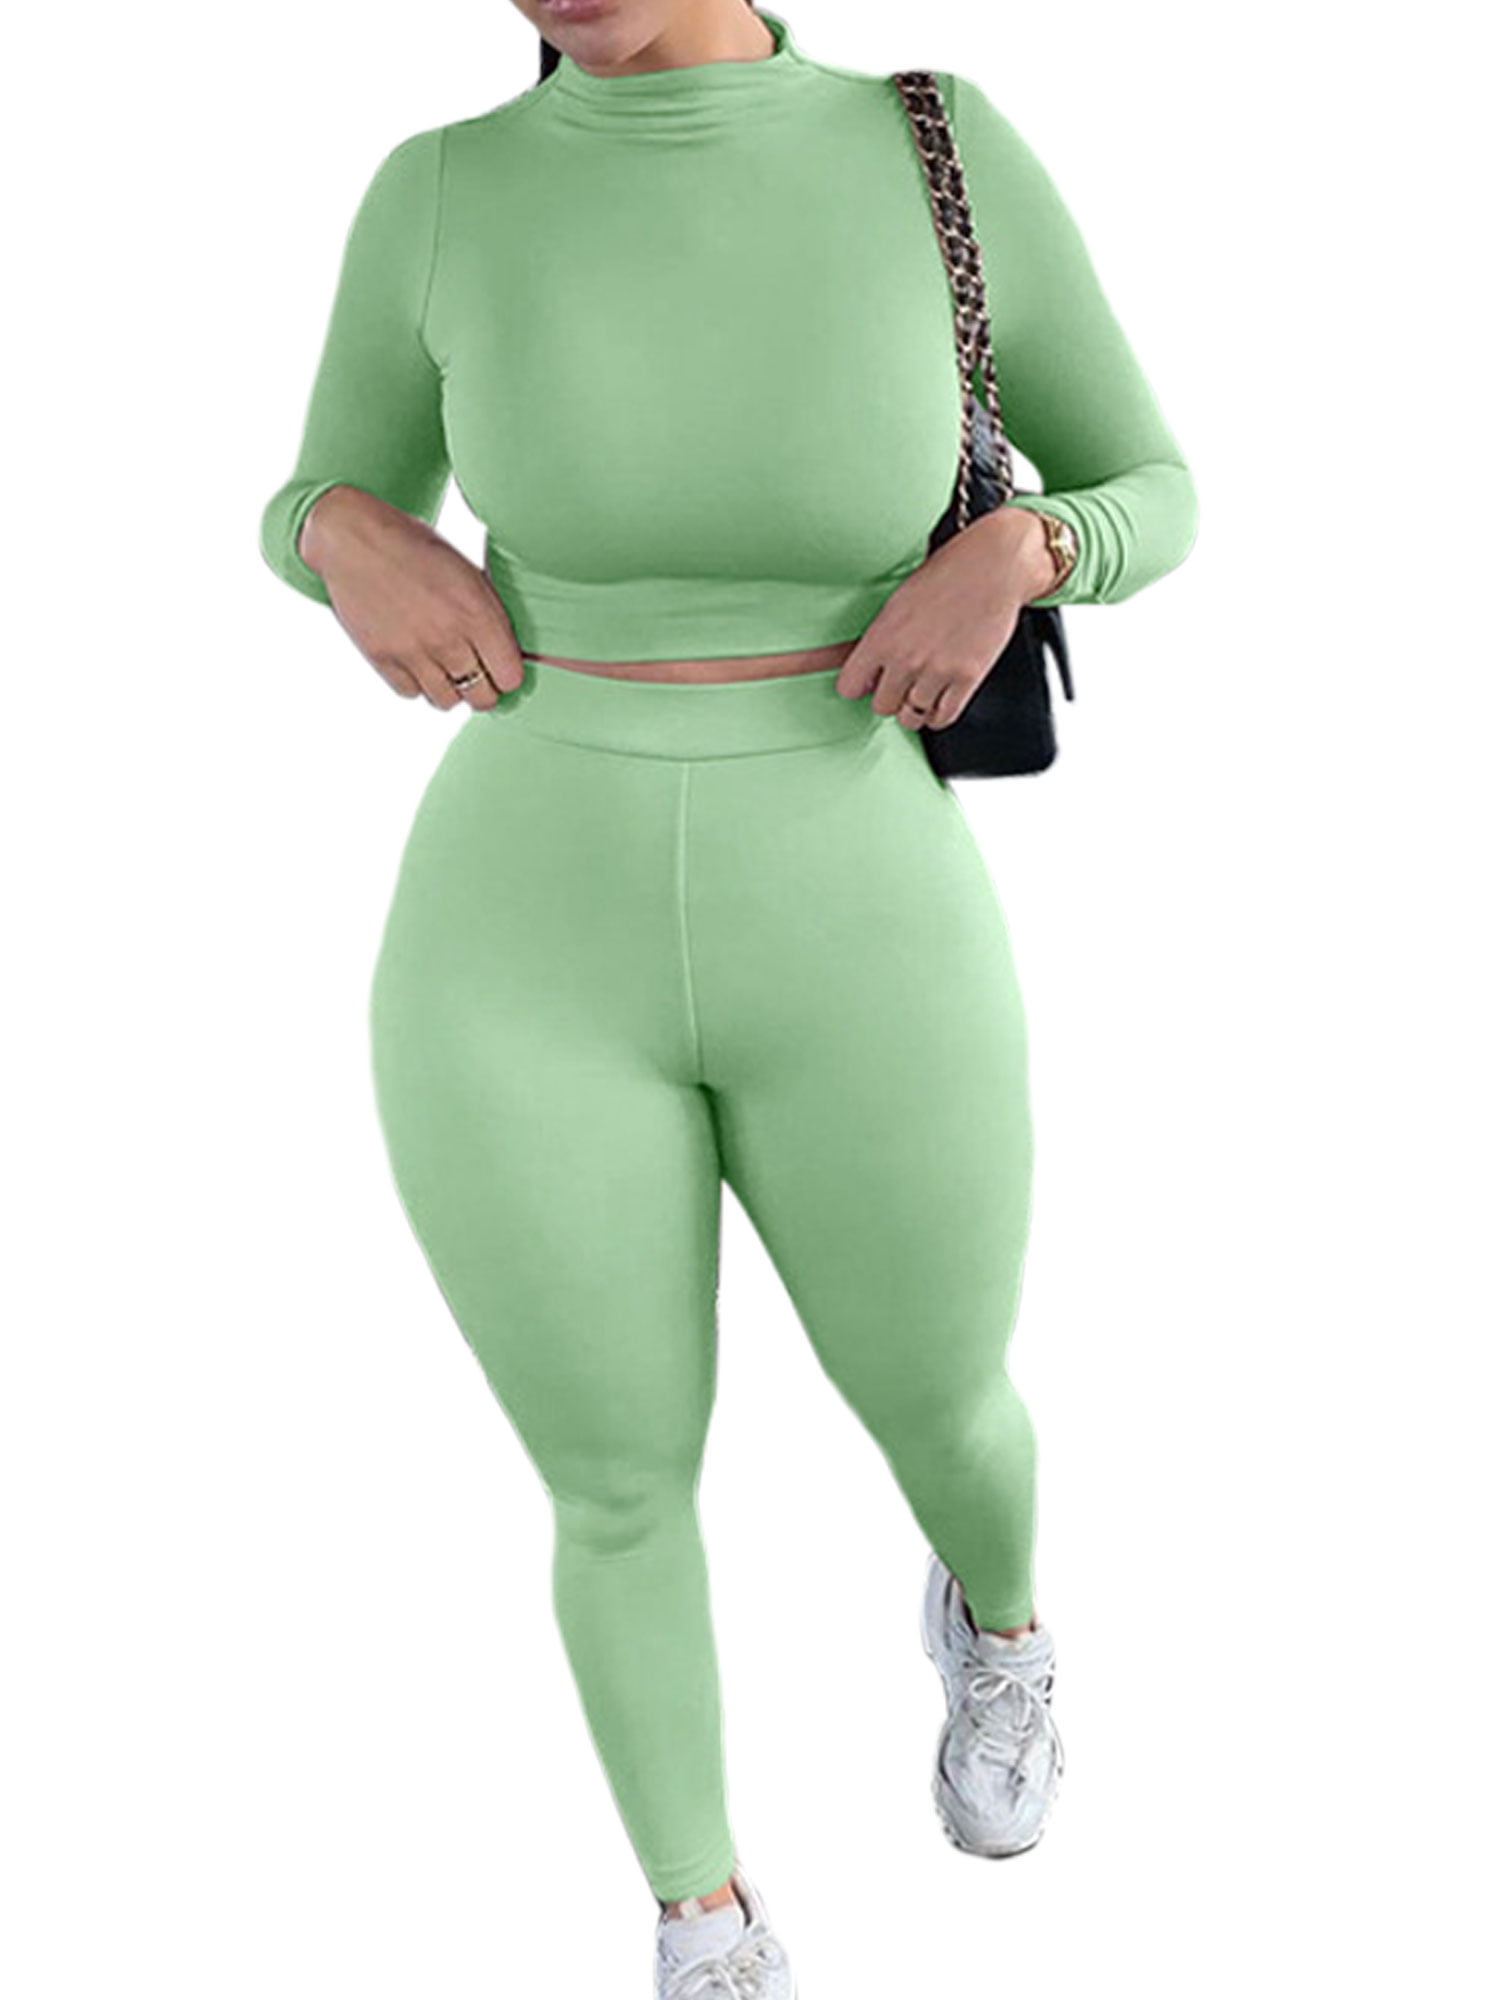 Women's Activewear Set Workout Sets 2 Piece Seamless Color Block Clothing  Suit Gray Green Sapphire Spandex Yoga Fitness Running Tummy Control Butt  Lif